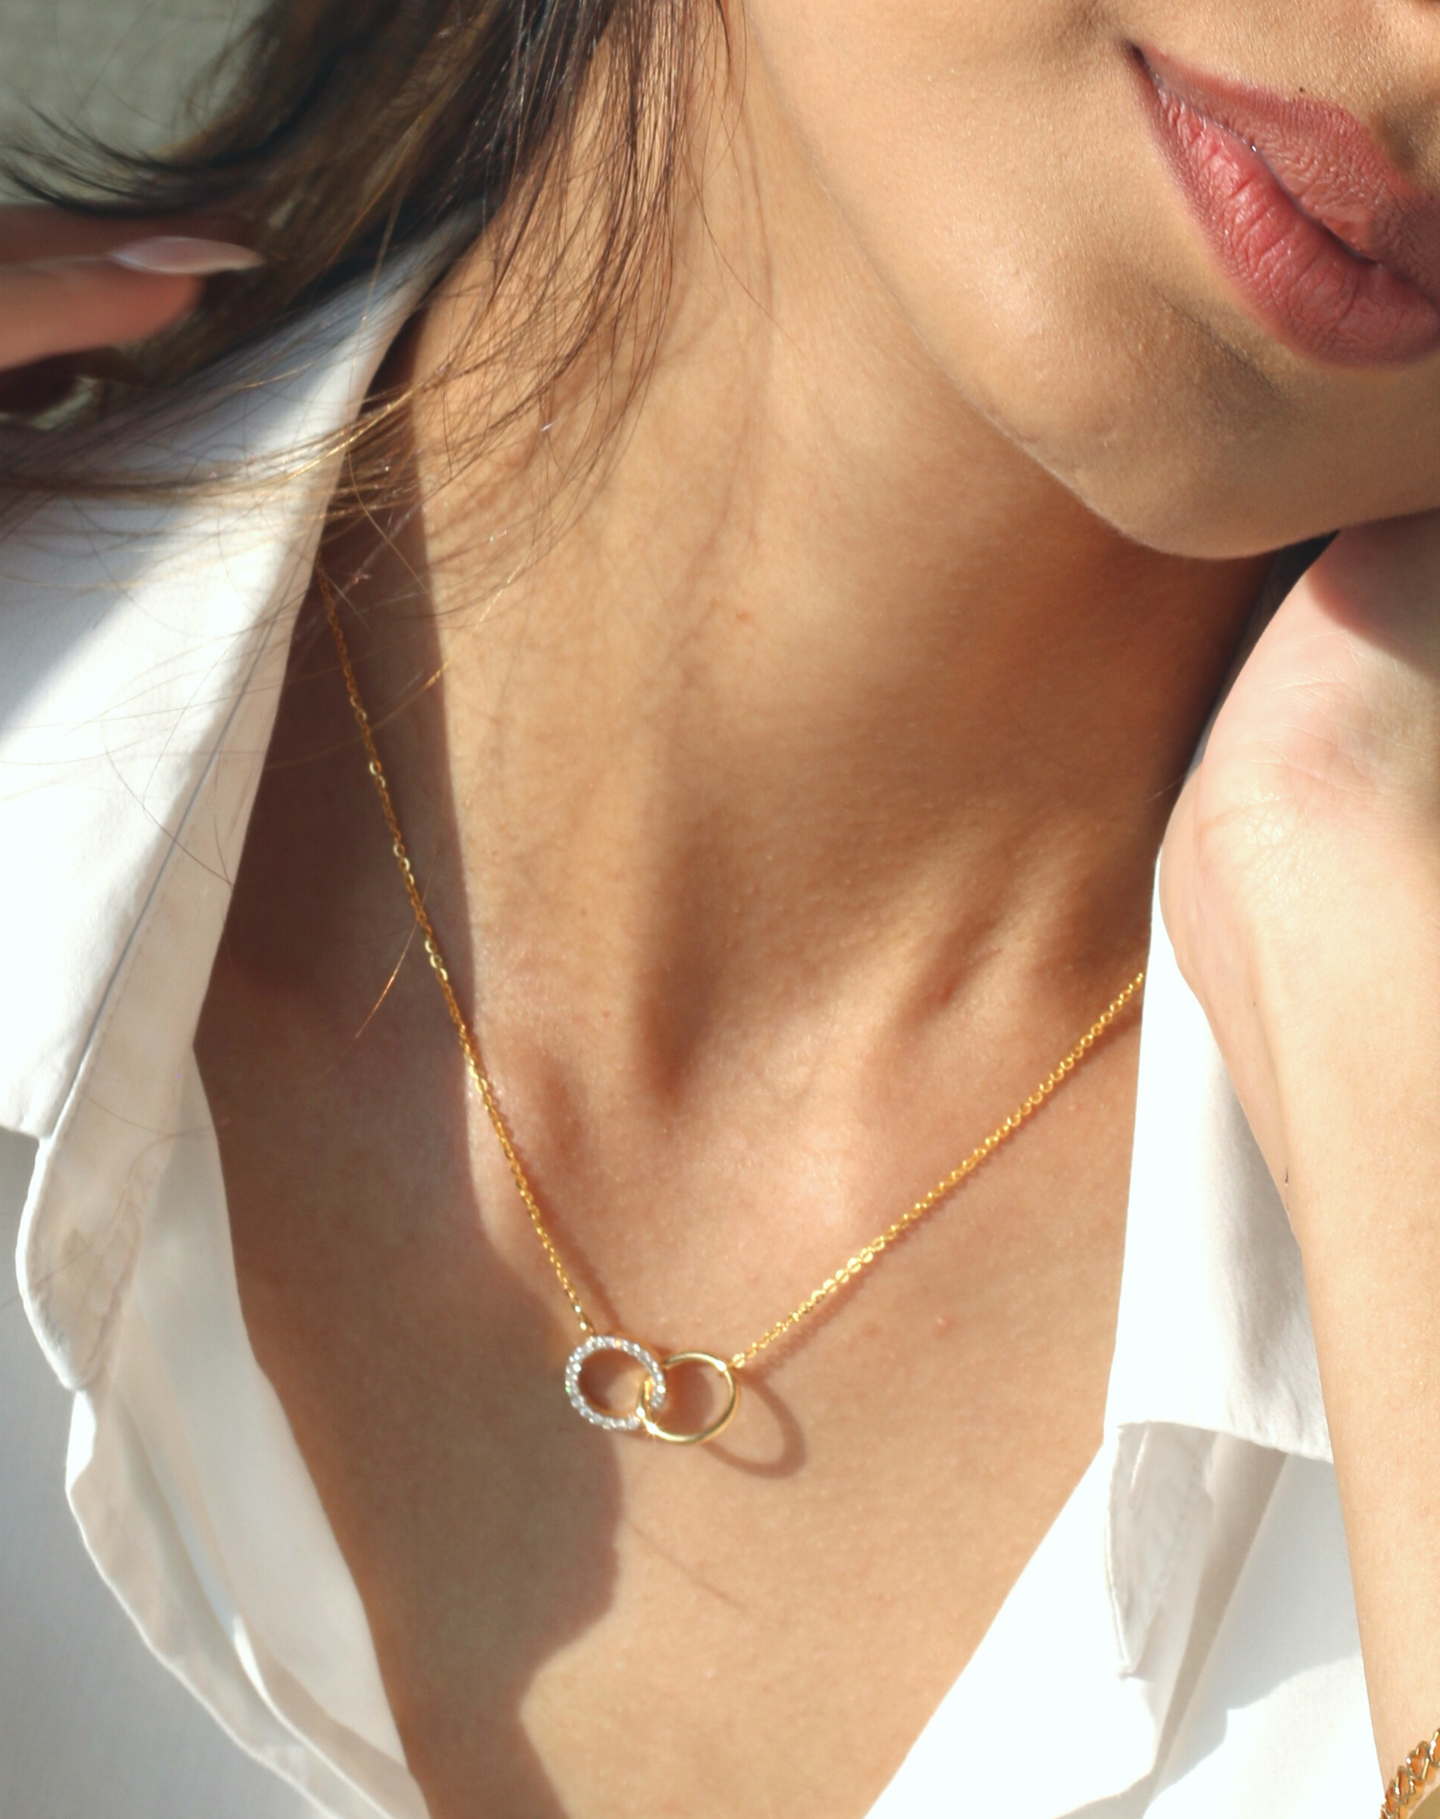 Interlinked Circles 'Forever' Necklace. Sterling Silver, Handcrafted